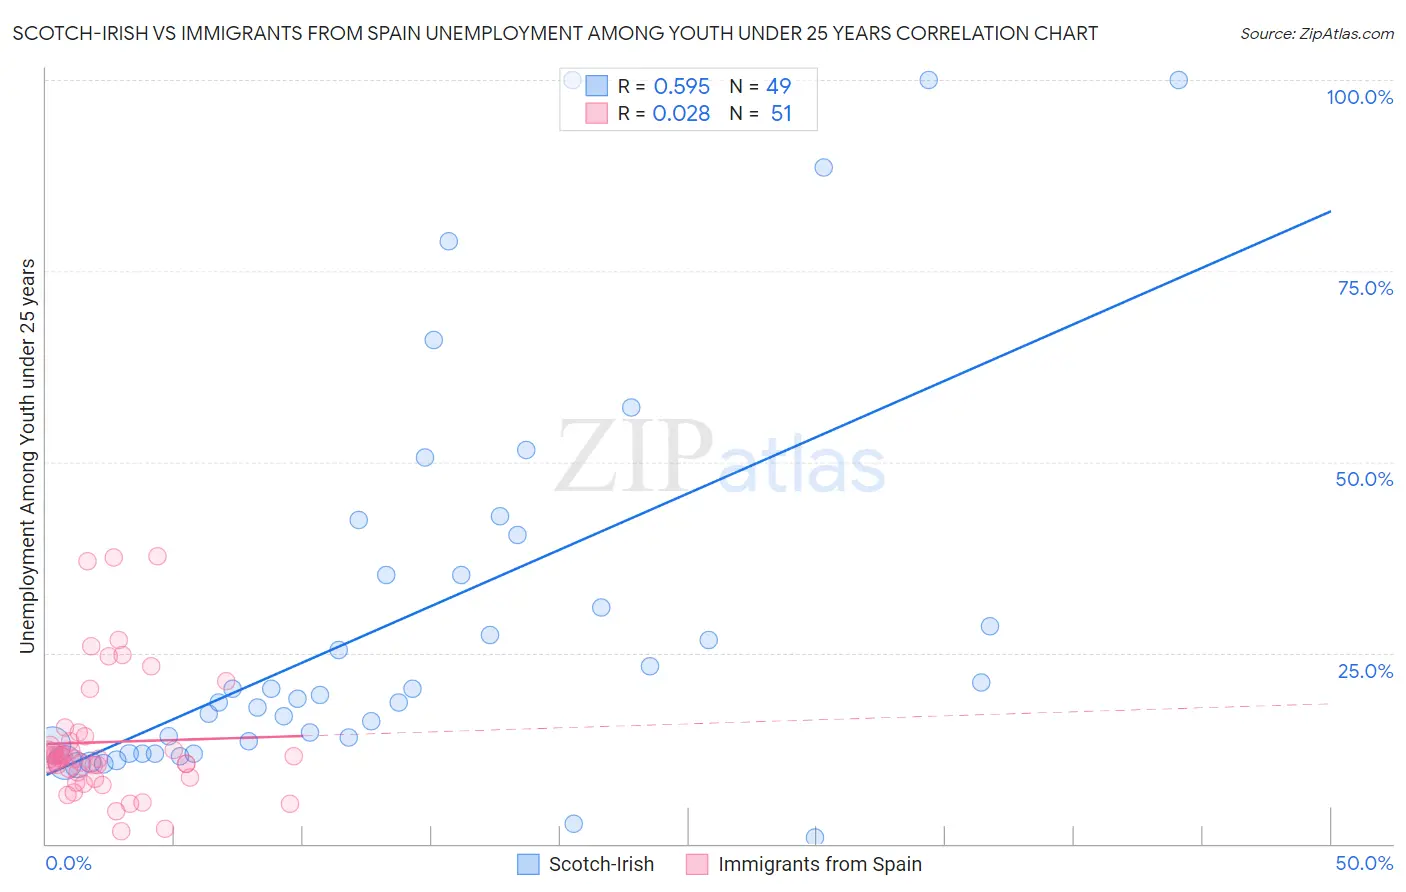 Scotch-Irish vs Immigrants from Spain Unemployment Among Youth under 25 years